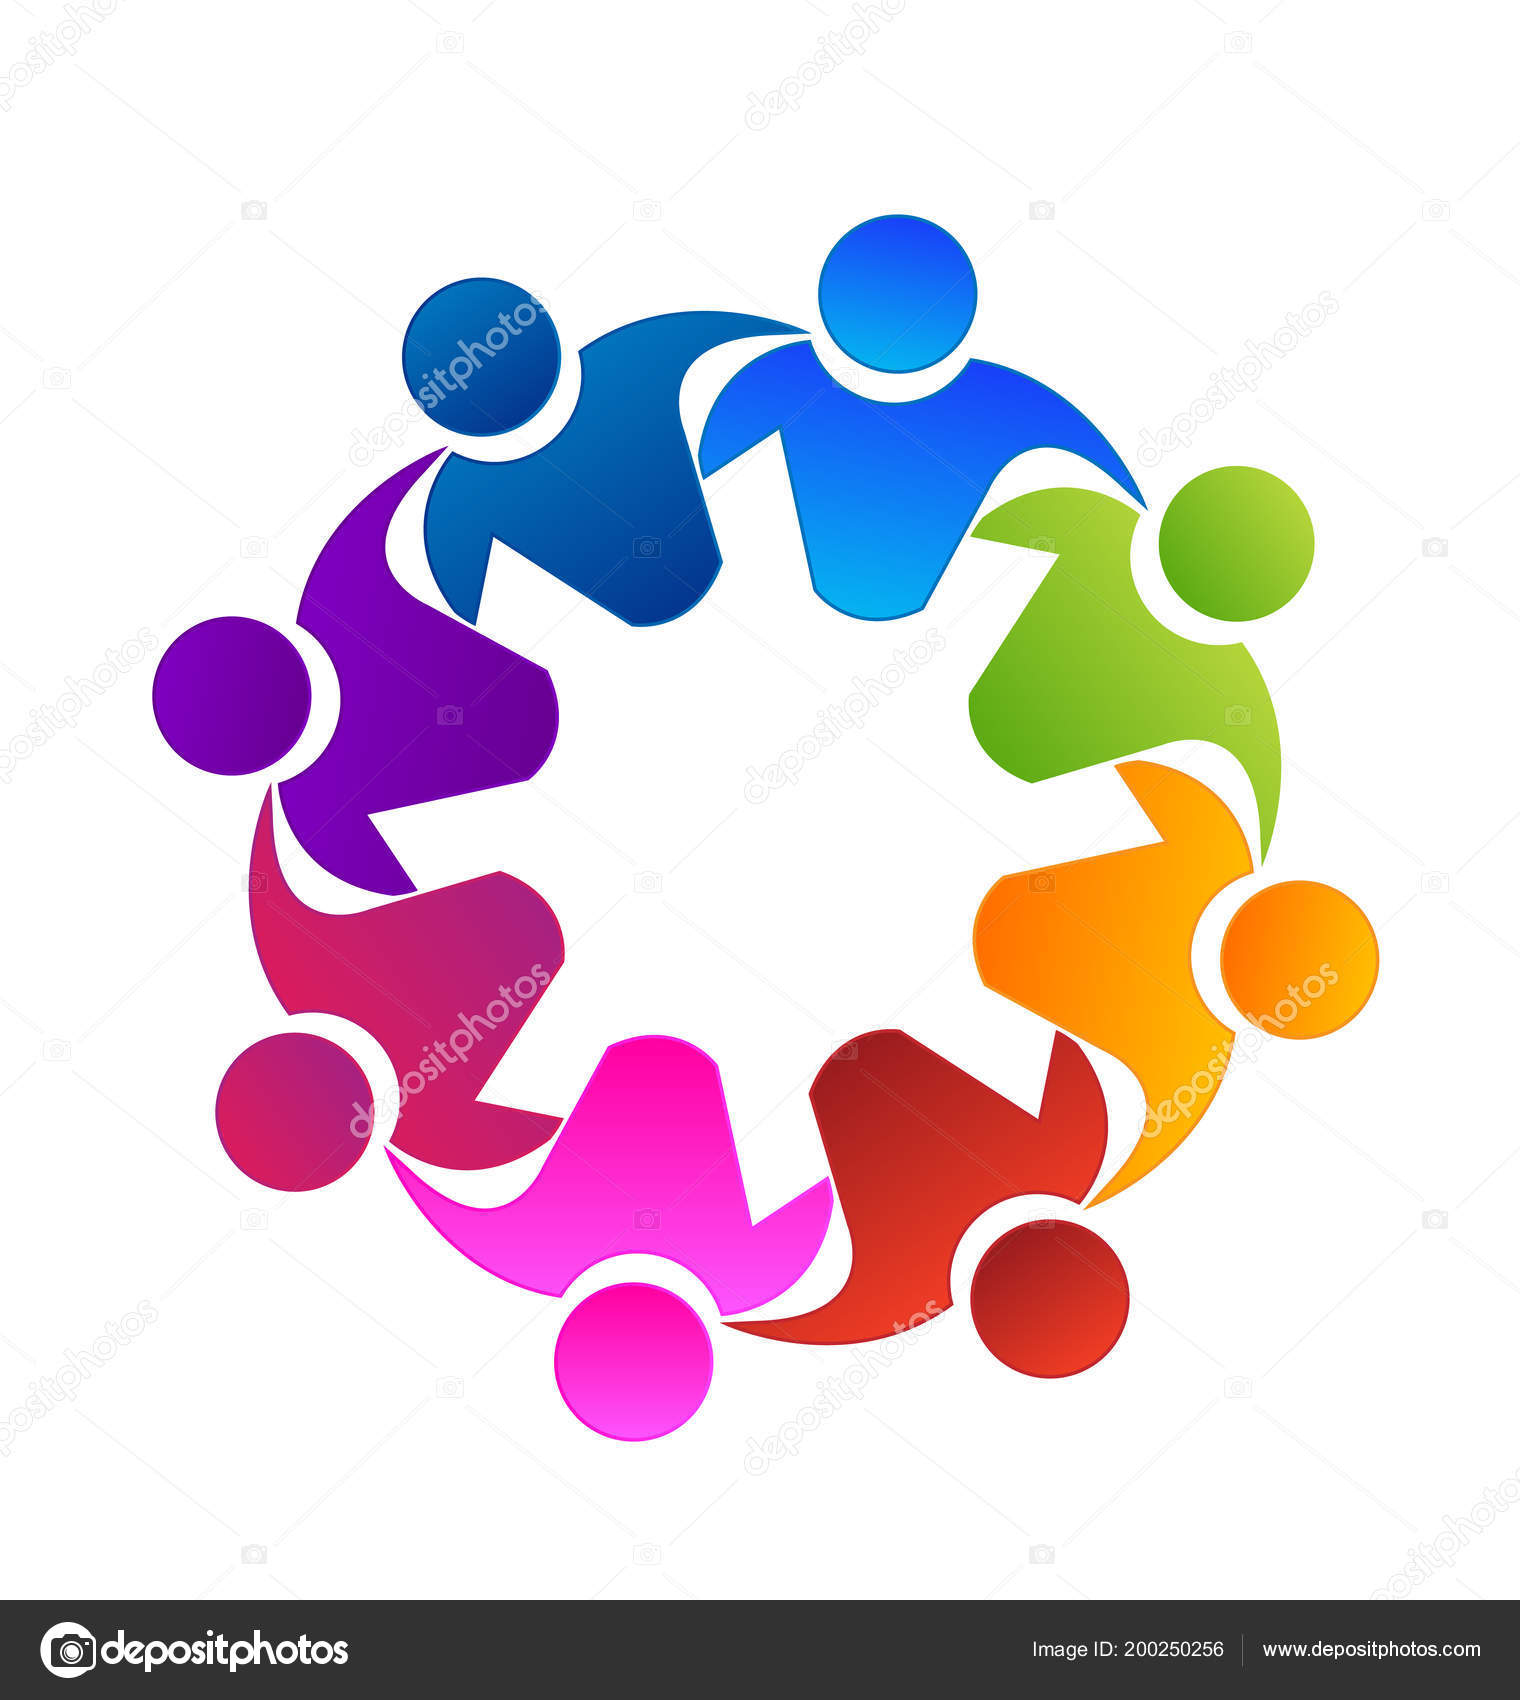 Images friends Teamwork group  of friends icon   Stock 